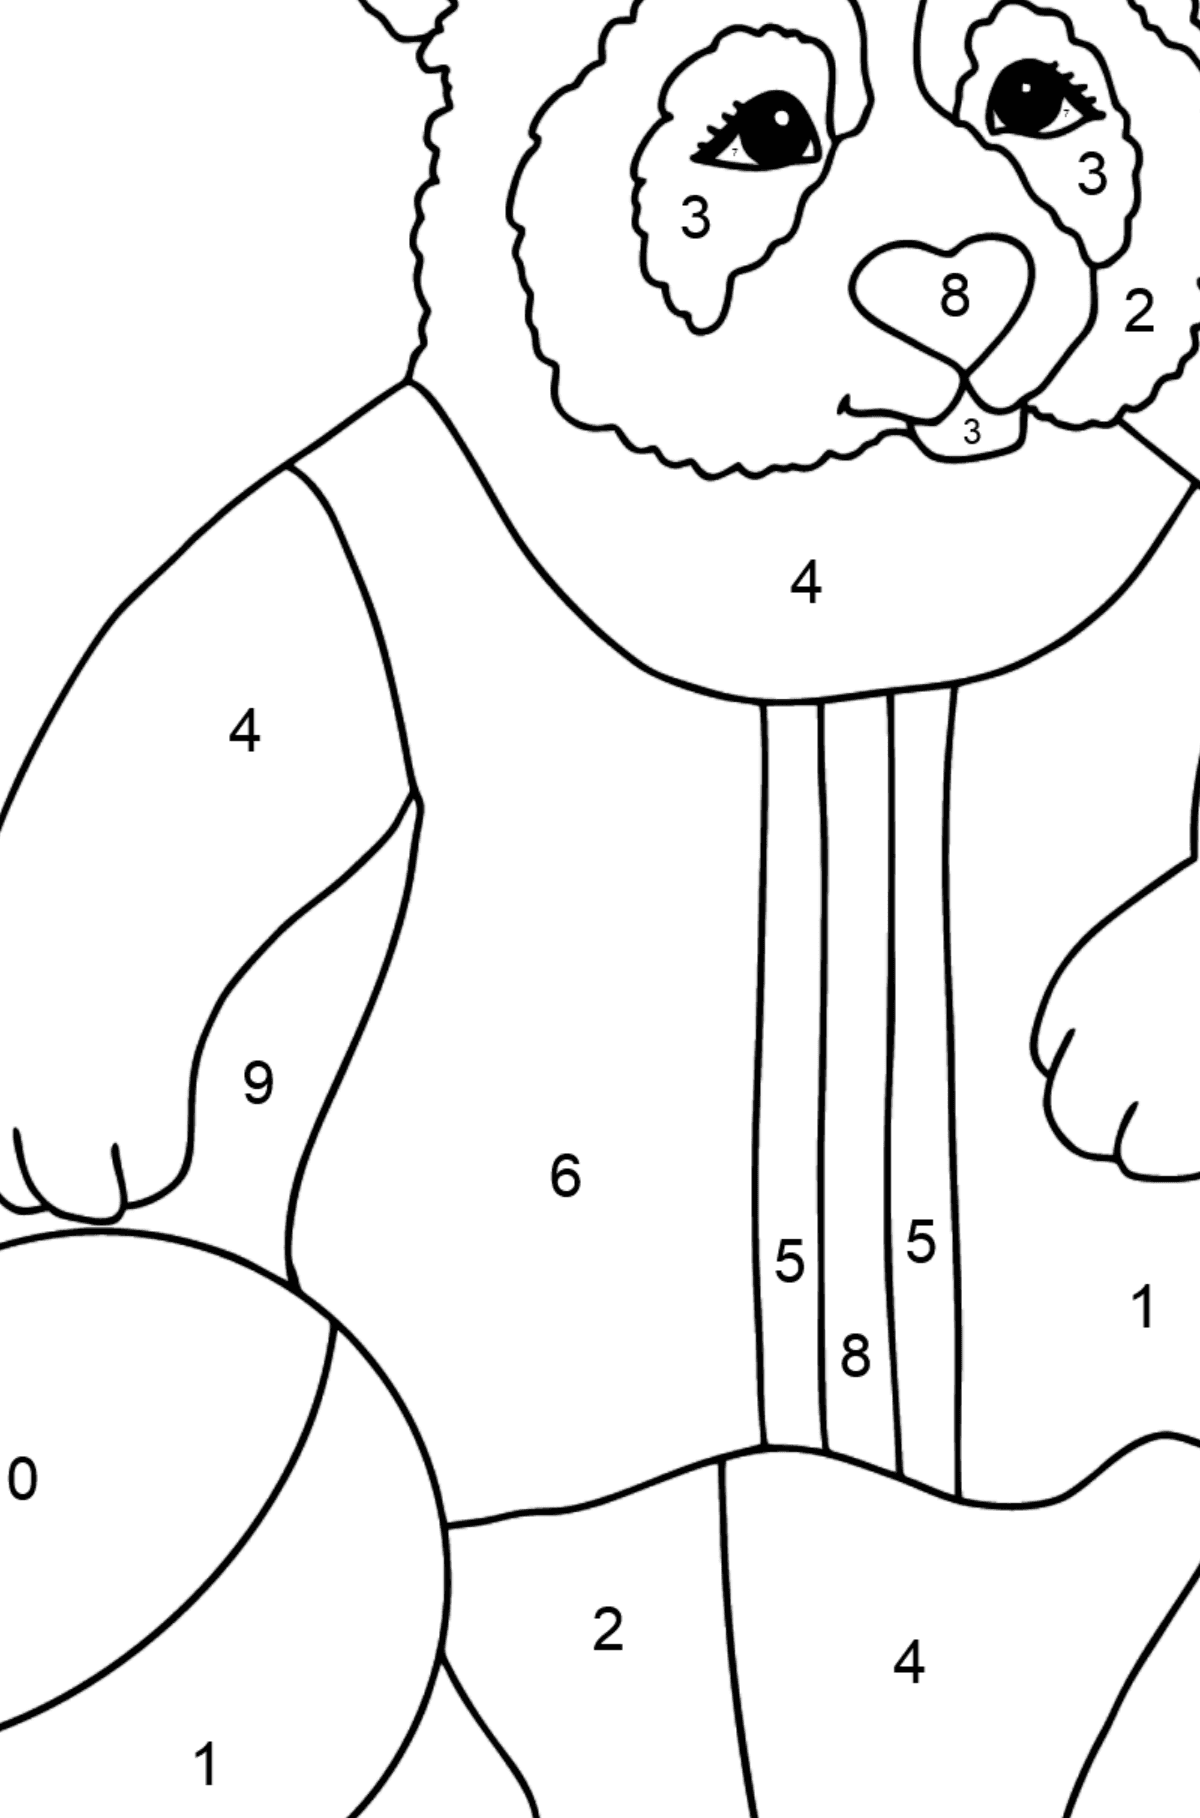 Coloring Picture - A Panda is Playing on a Beach - Coloring by Numbers for Kids